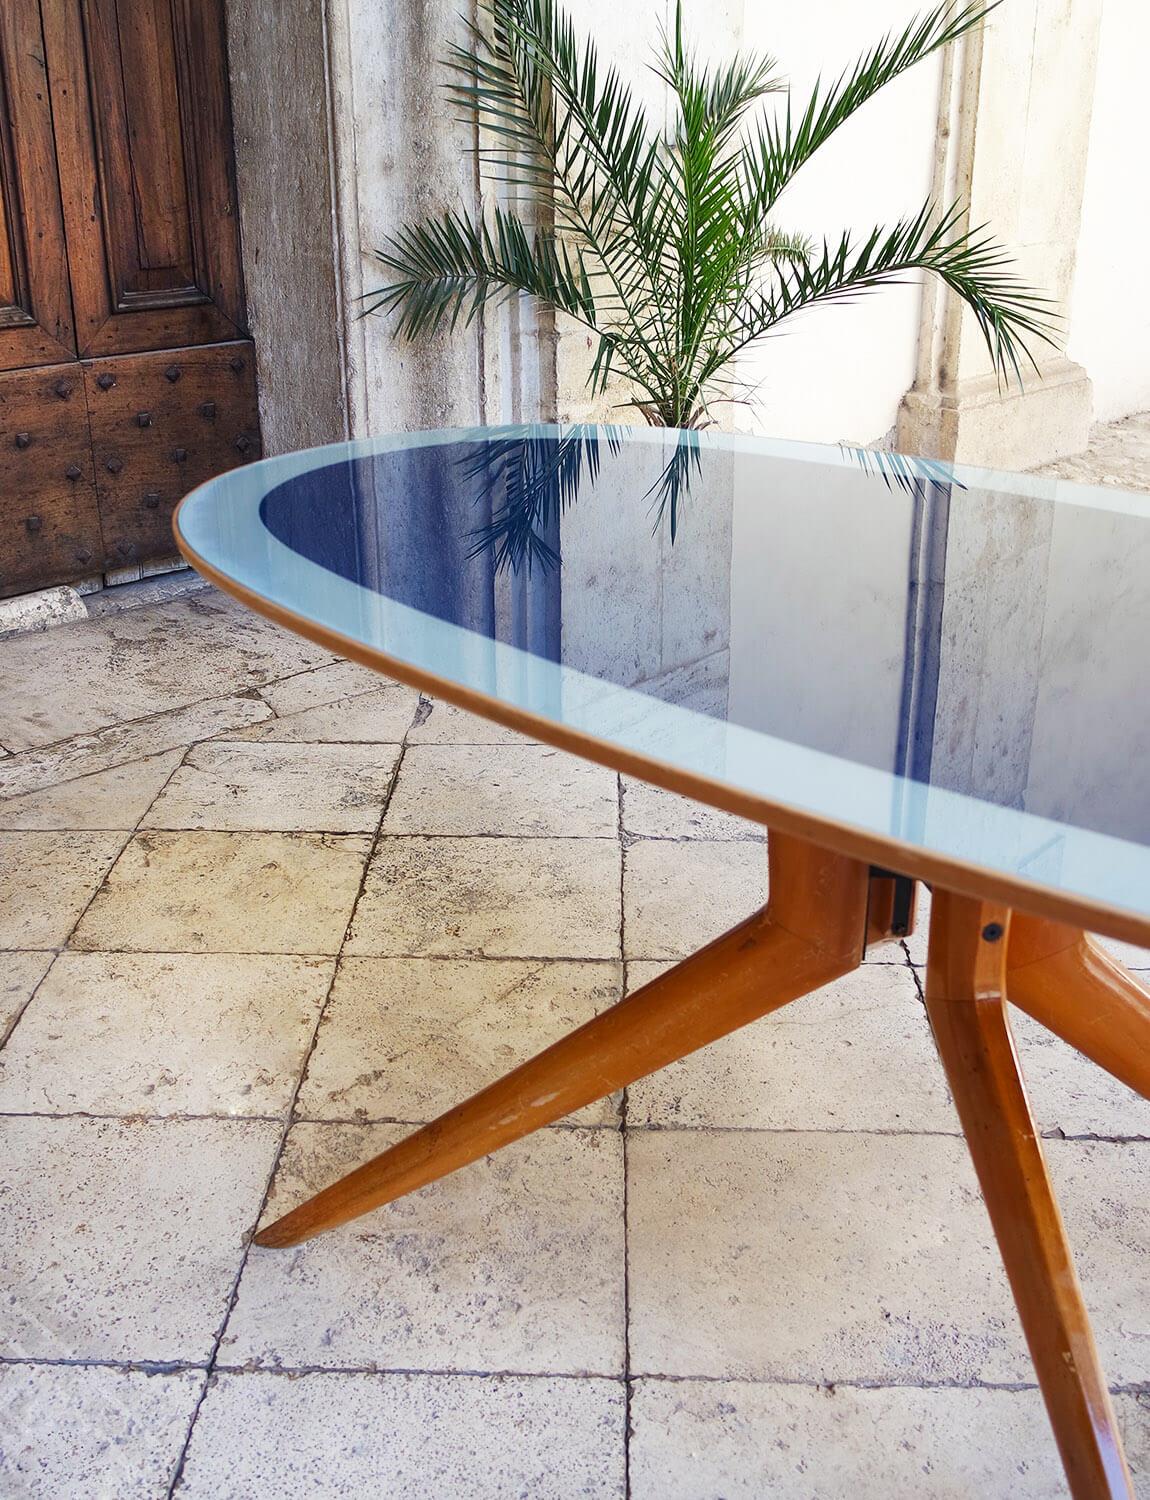 Mid-20th Century Mid-century Italian Blue Glass Dining Table by Ico Parisi made in 1953